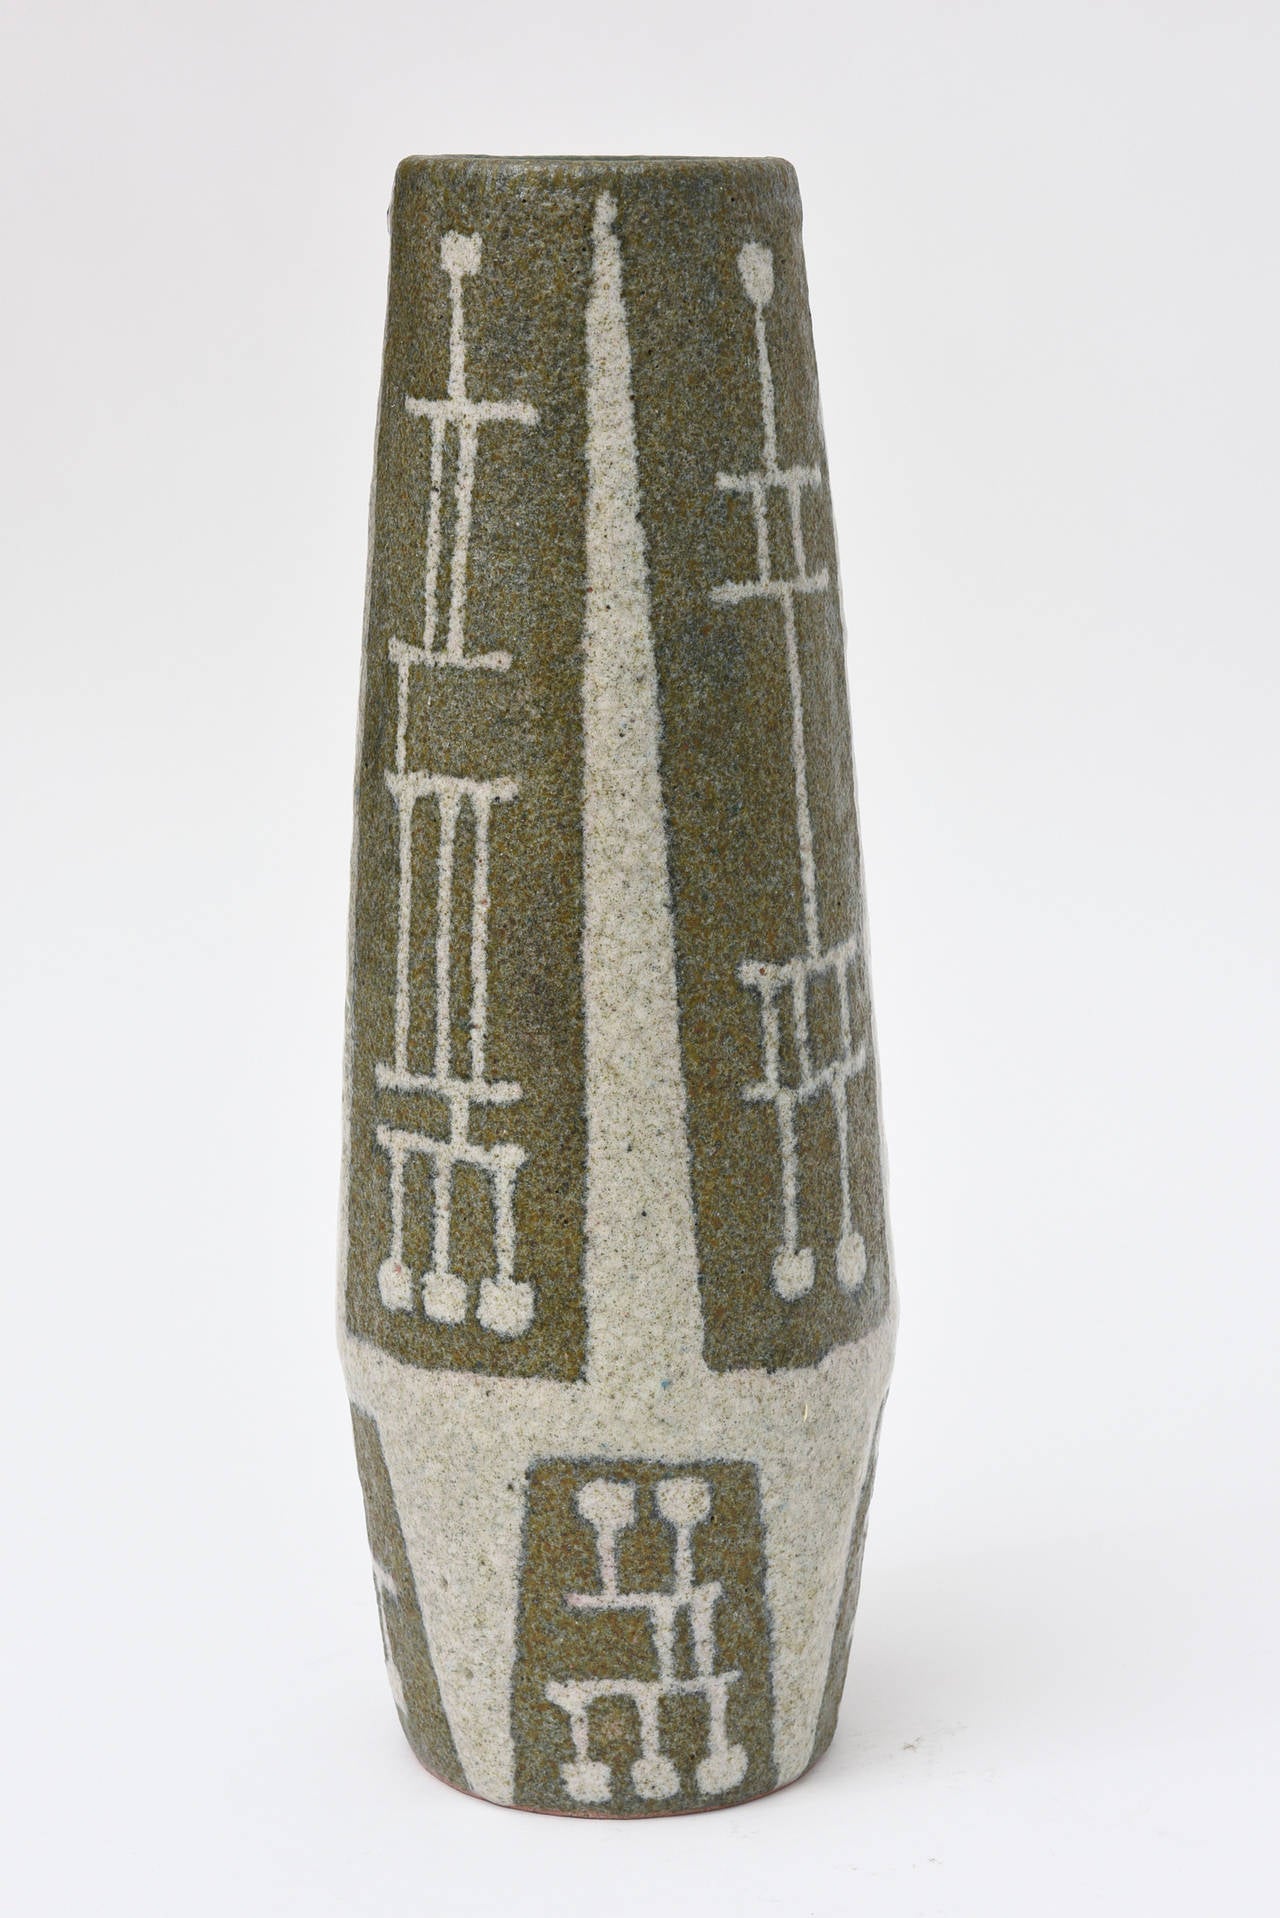 This one of a kind very fine studio ceramic is in the style of Gambone. The Mid-Century stick figures are so modernist. The glazes are triple and textural. The exterior is an olive green/ light brown base with overlay of crème.
The interior color